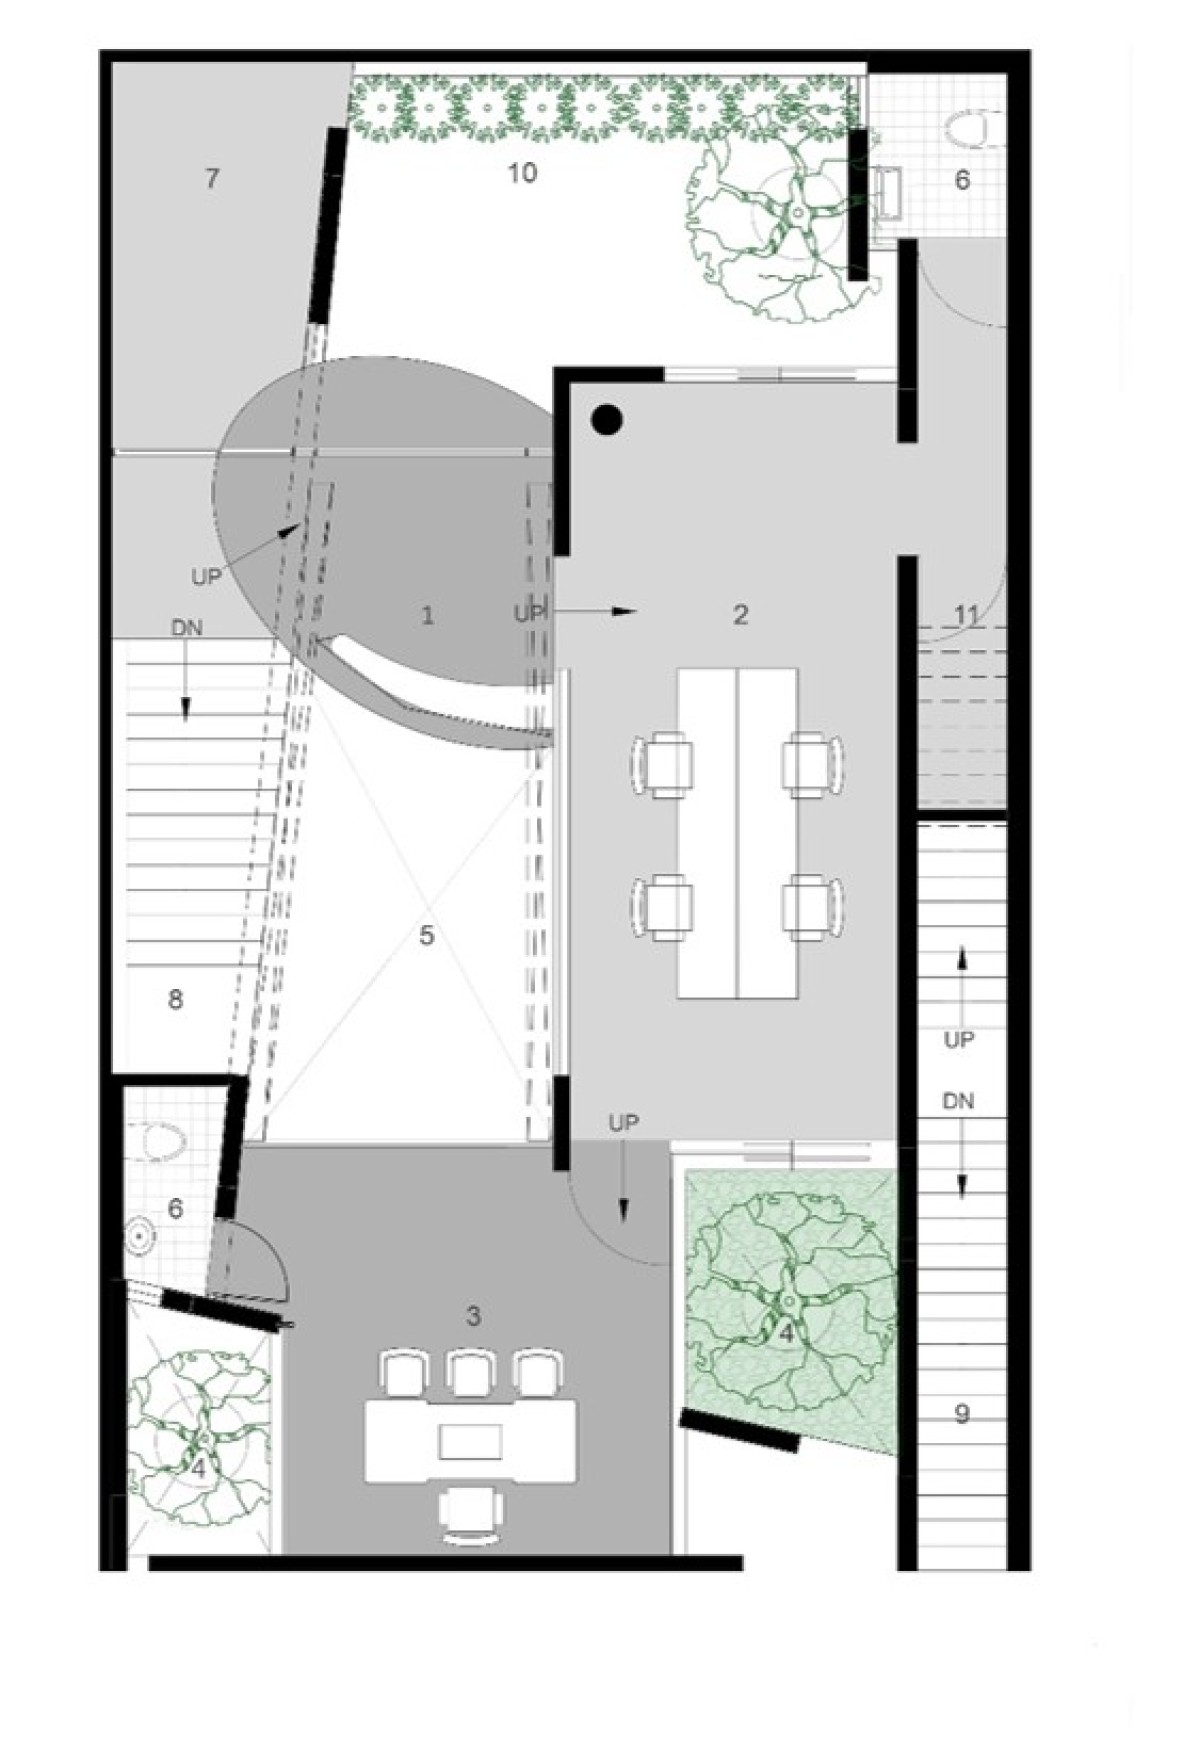 First floor plan of Office 543 by Charged Voids